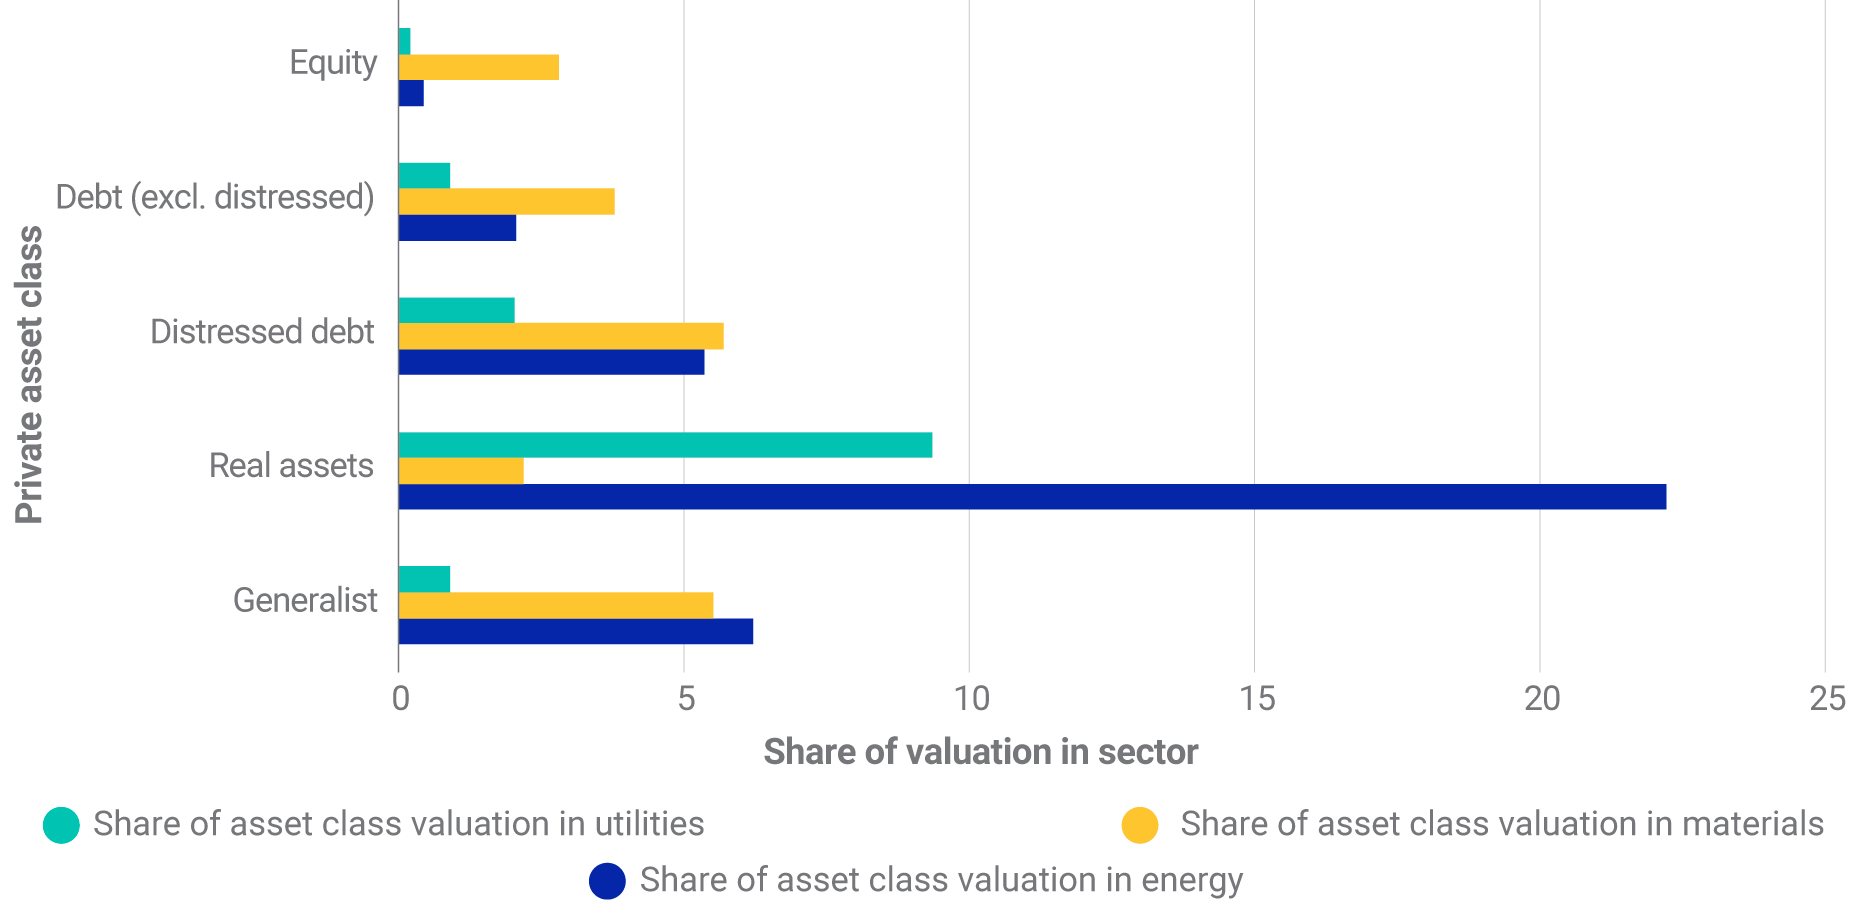 Real assets had the greatest allocation to energy by far 